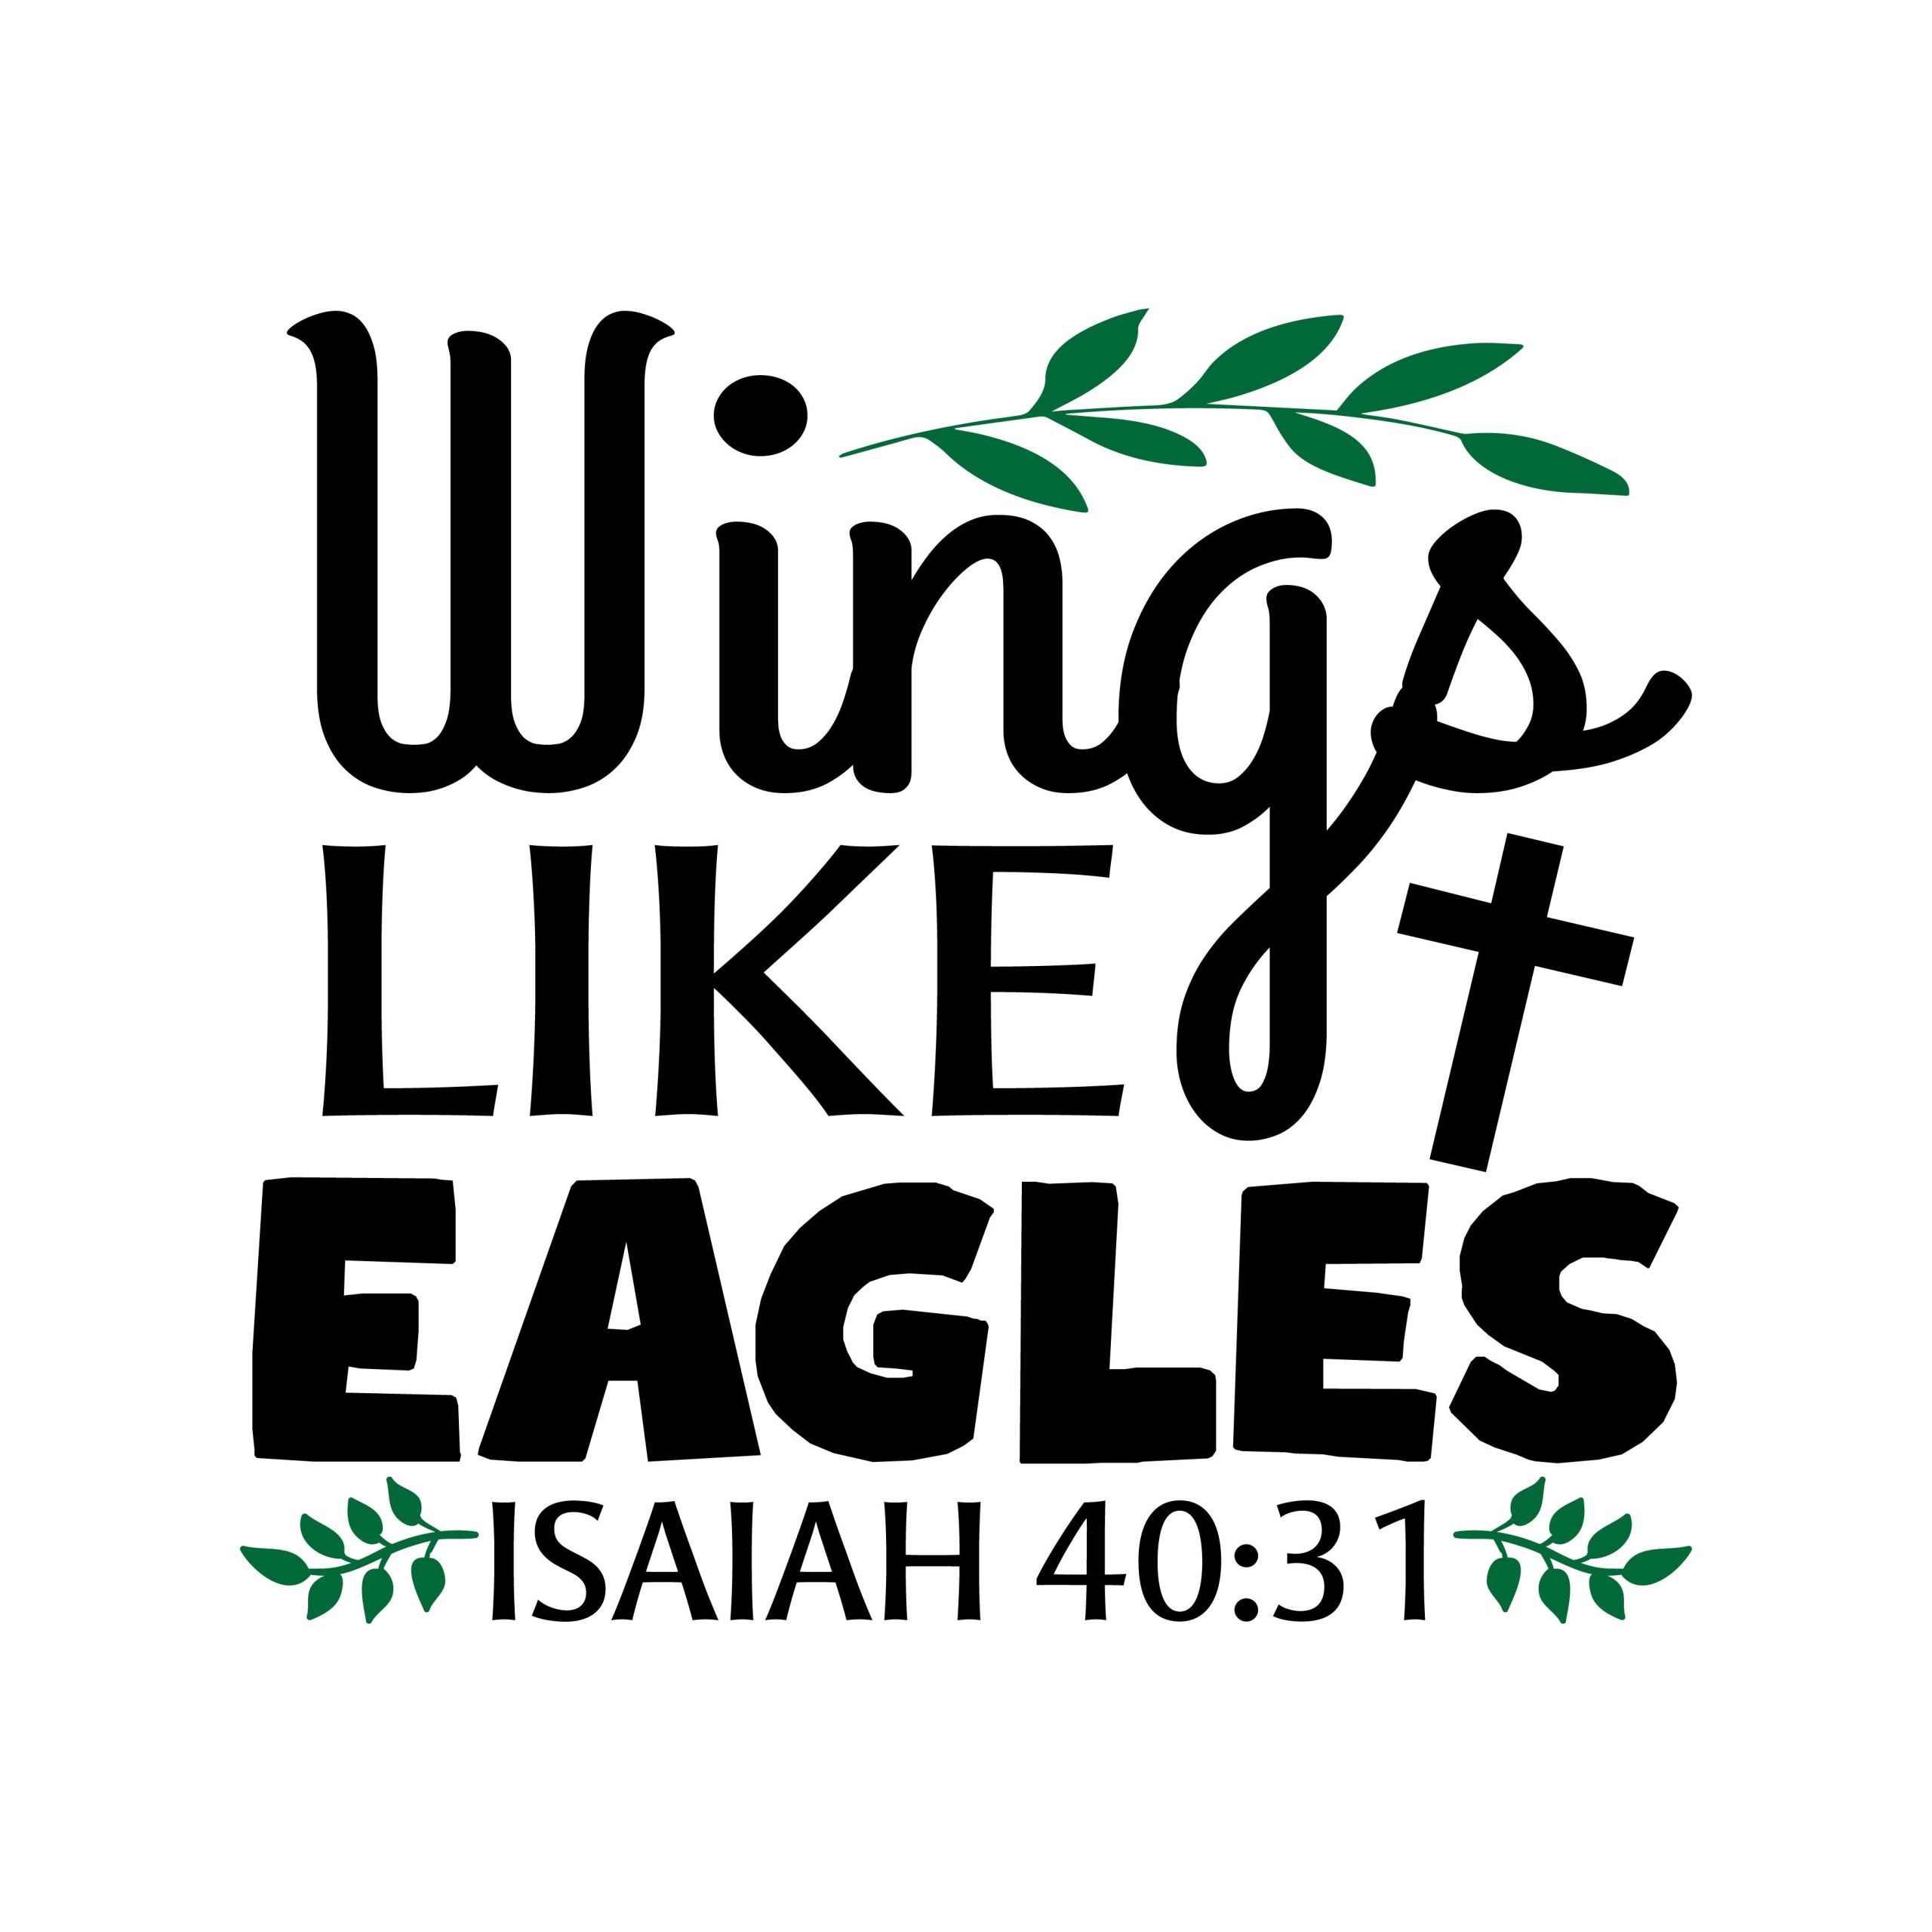 Wings like eagles Isaiah 40:31, bible verses, scripture verses, svg files, passages, sayings, cricut designs, silhouette, embroidery, bundle, free cut files, design space, vector